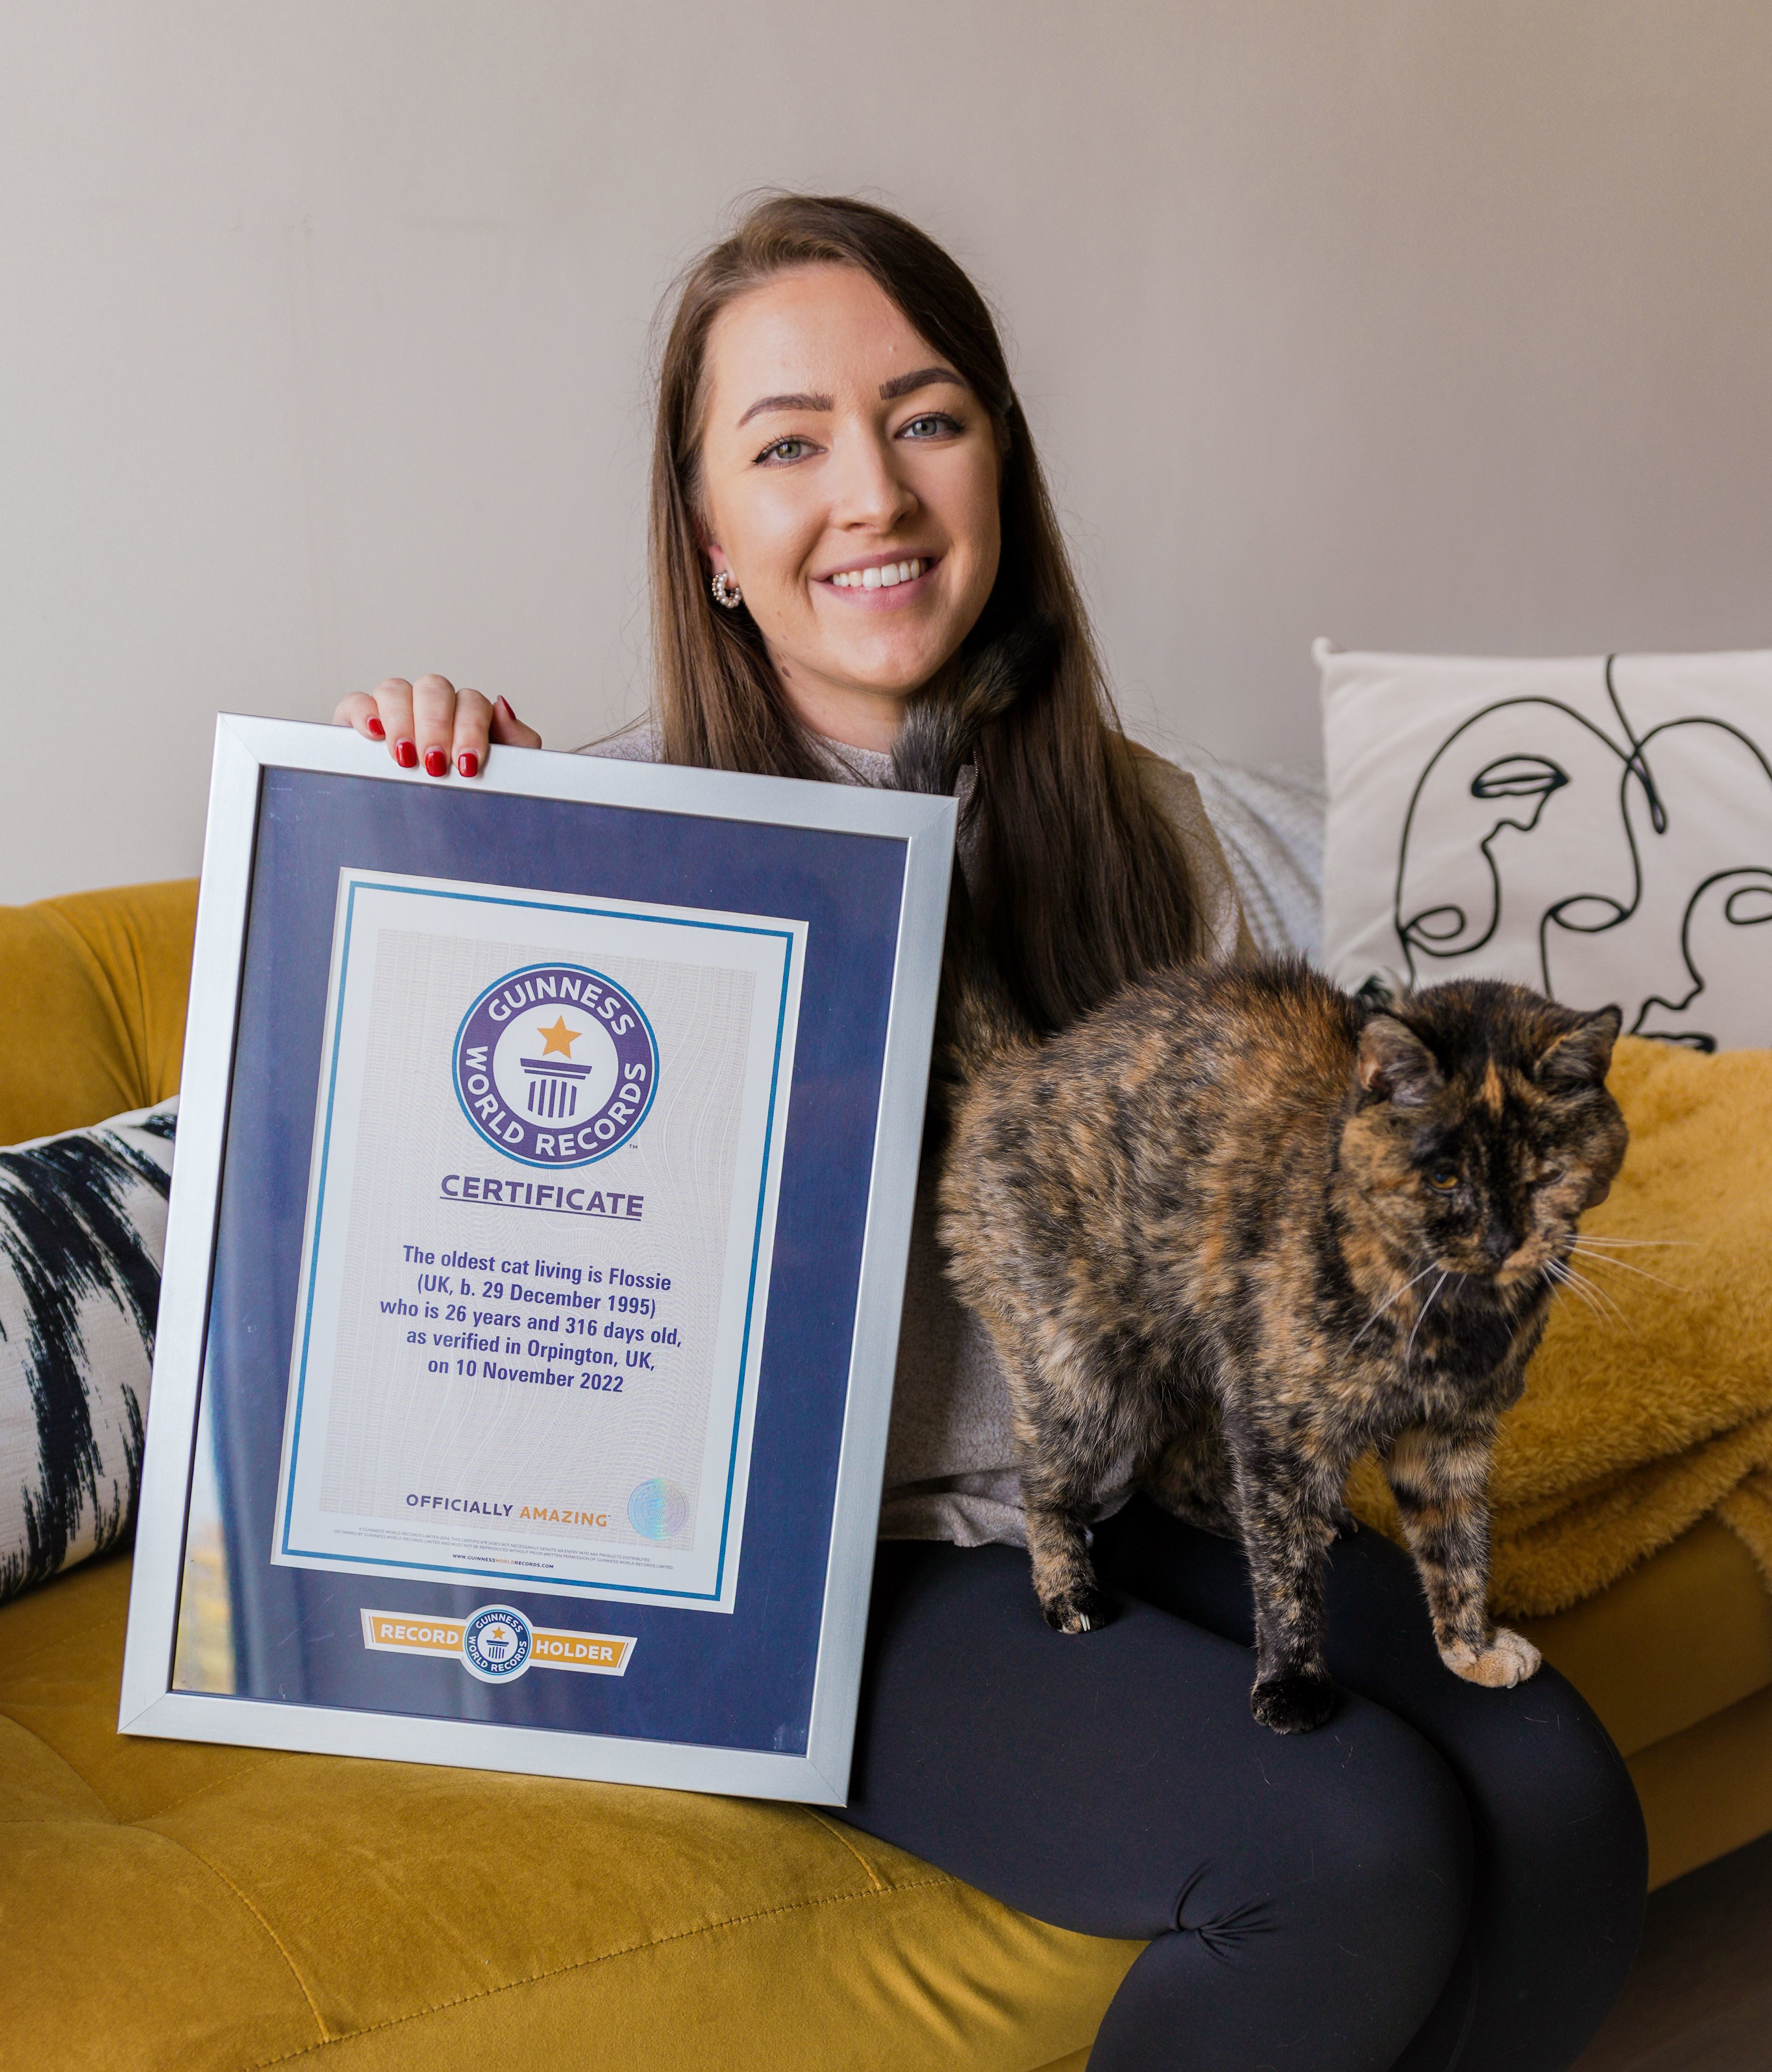 brunette woman with tortoiseshell cat on her lap and holding framed Guinness World Records certificate